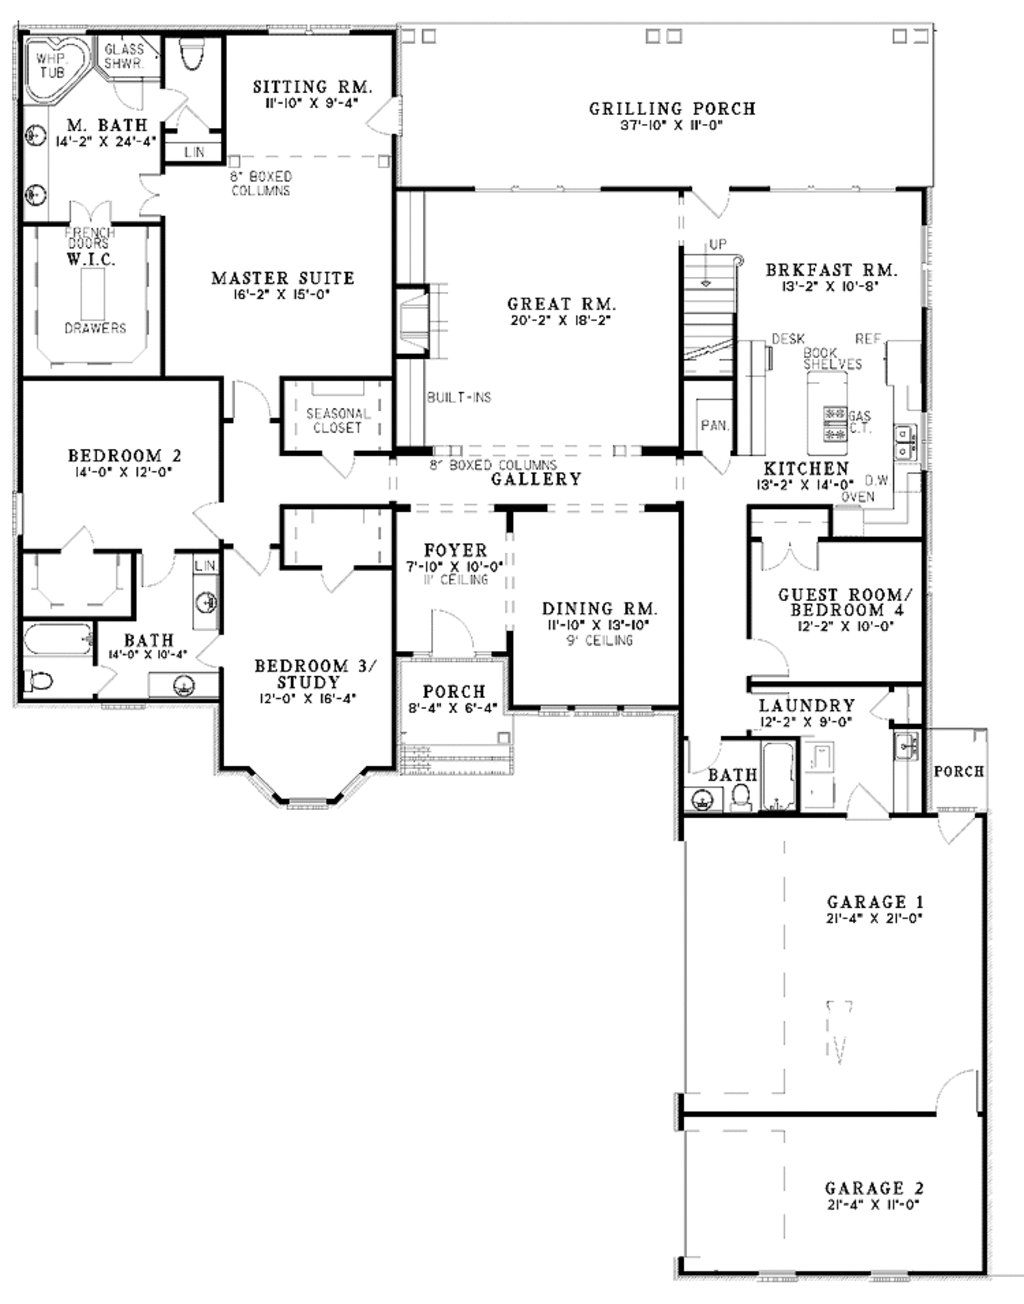 country-style-house-plan-5-beds-4-baths-3077-sq-ft-plan-17-2941